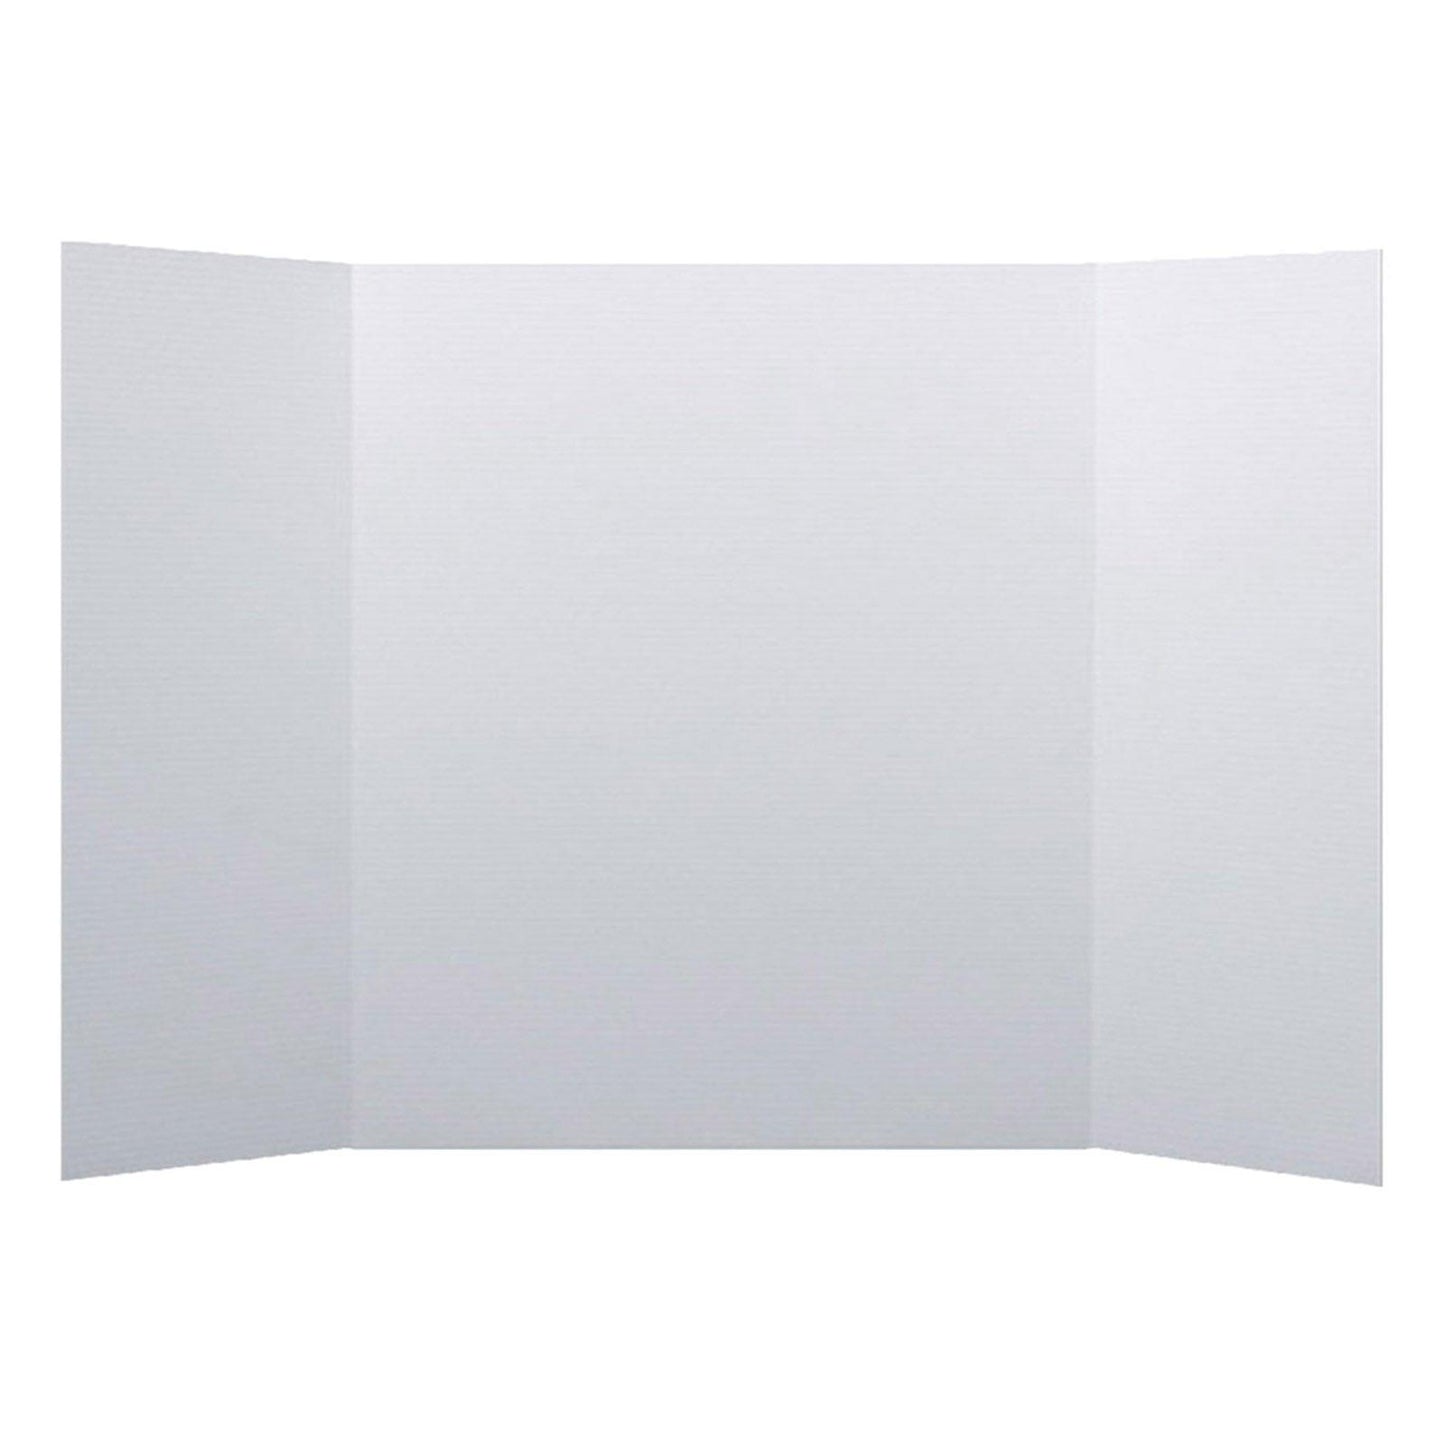 Corrugated Project Board, 1 Ply, 24" x 48", White, Pack of 24 - Loomini